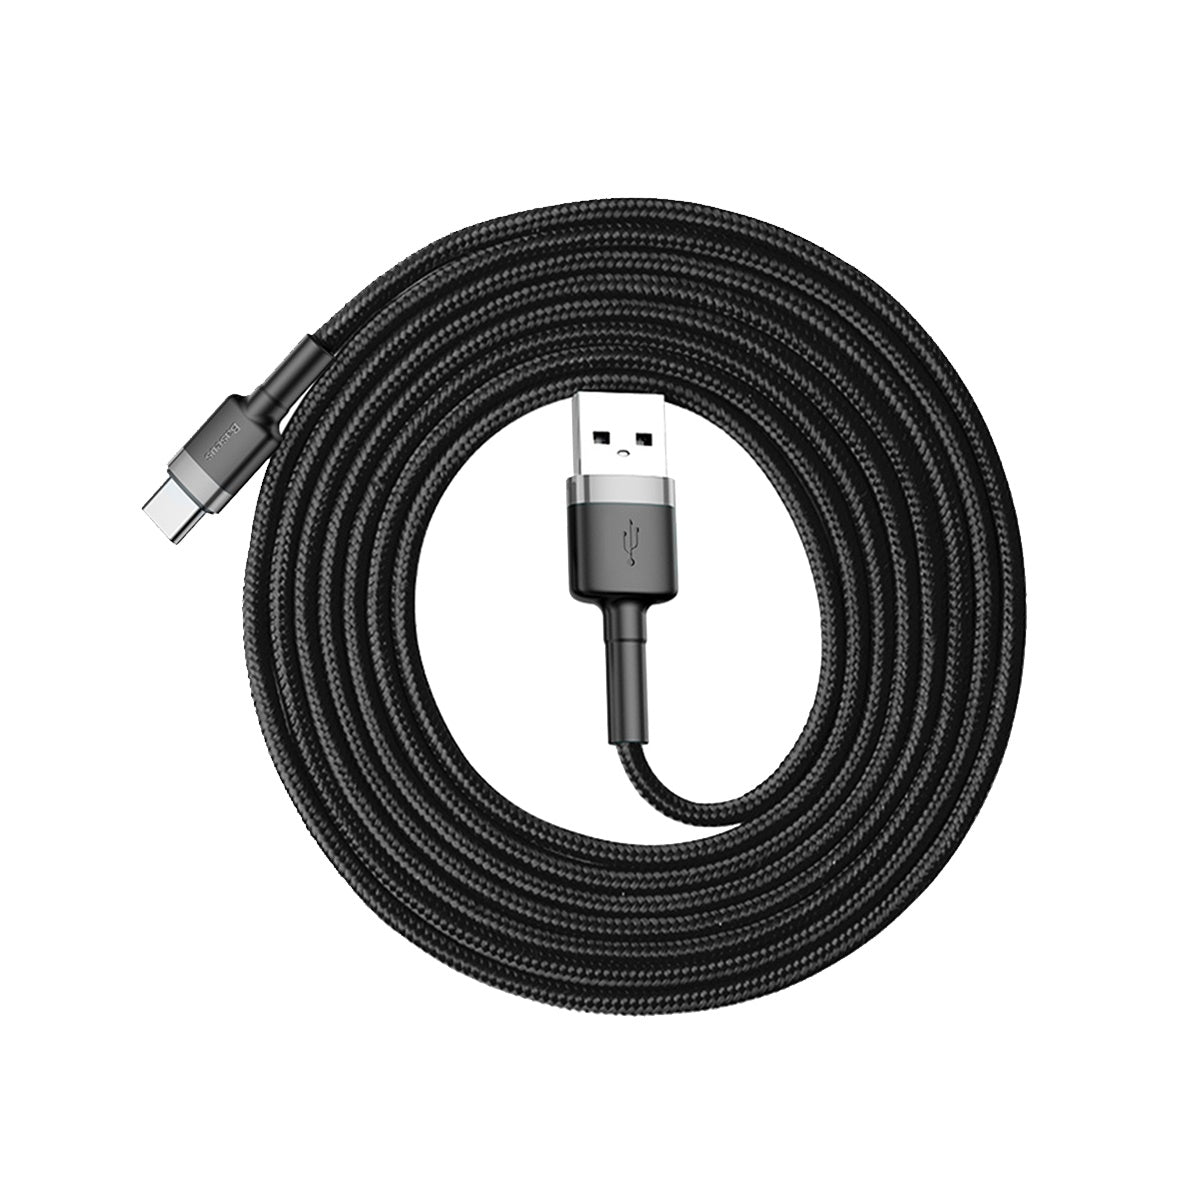 Baseus Cafule Series Fast Charging and Data Cable USB to Type C 2A 2M